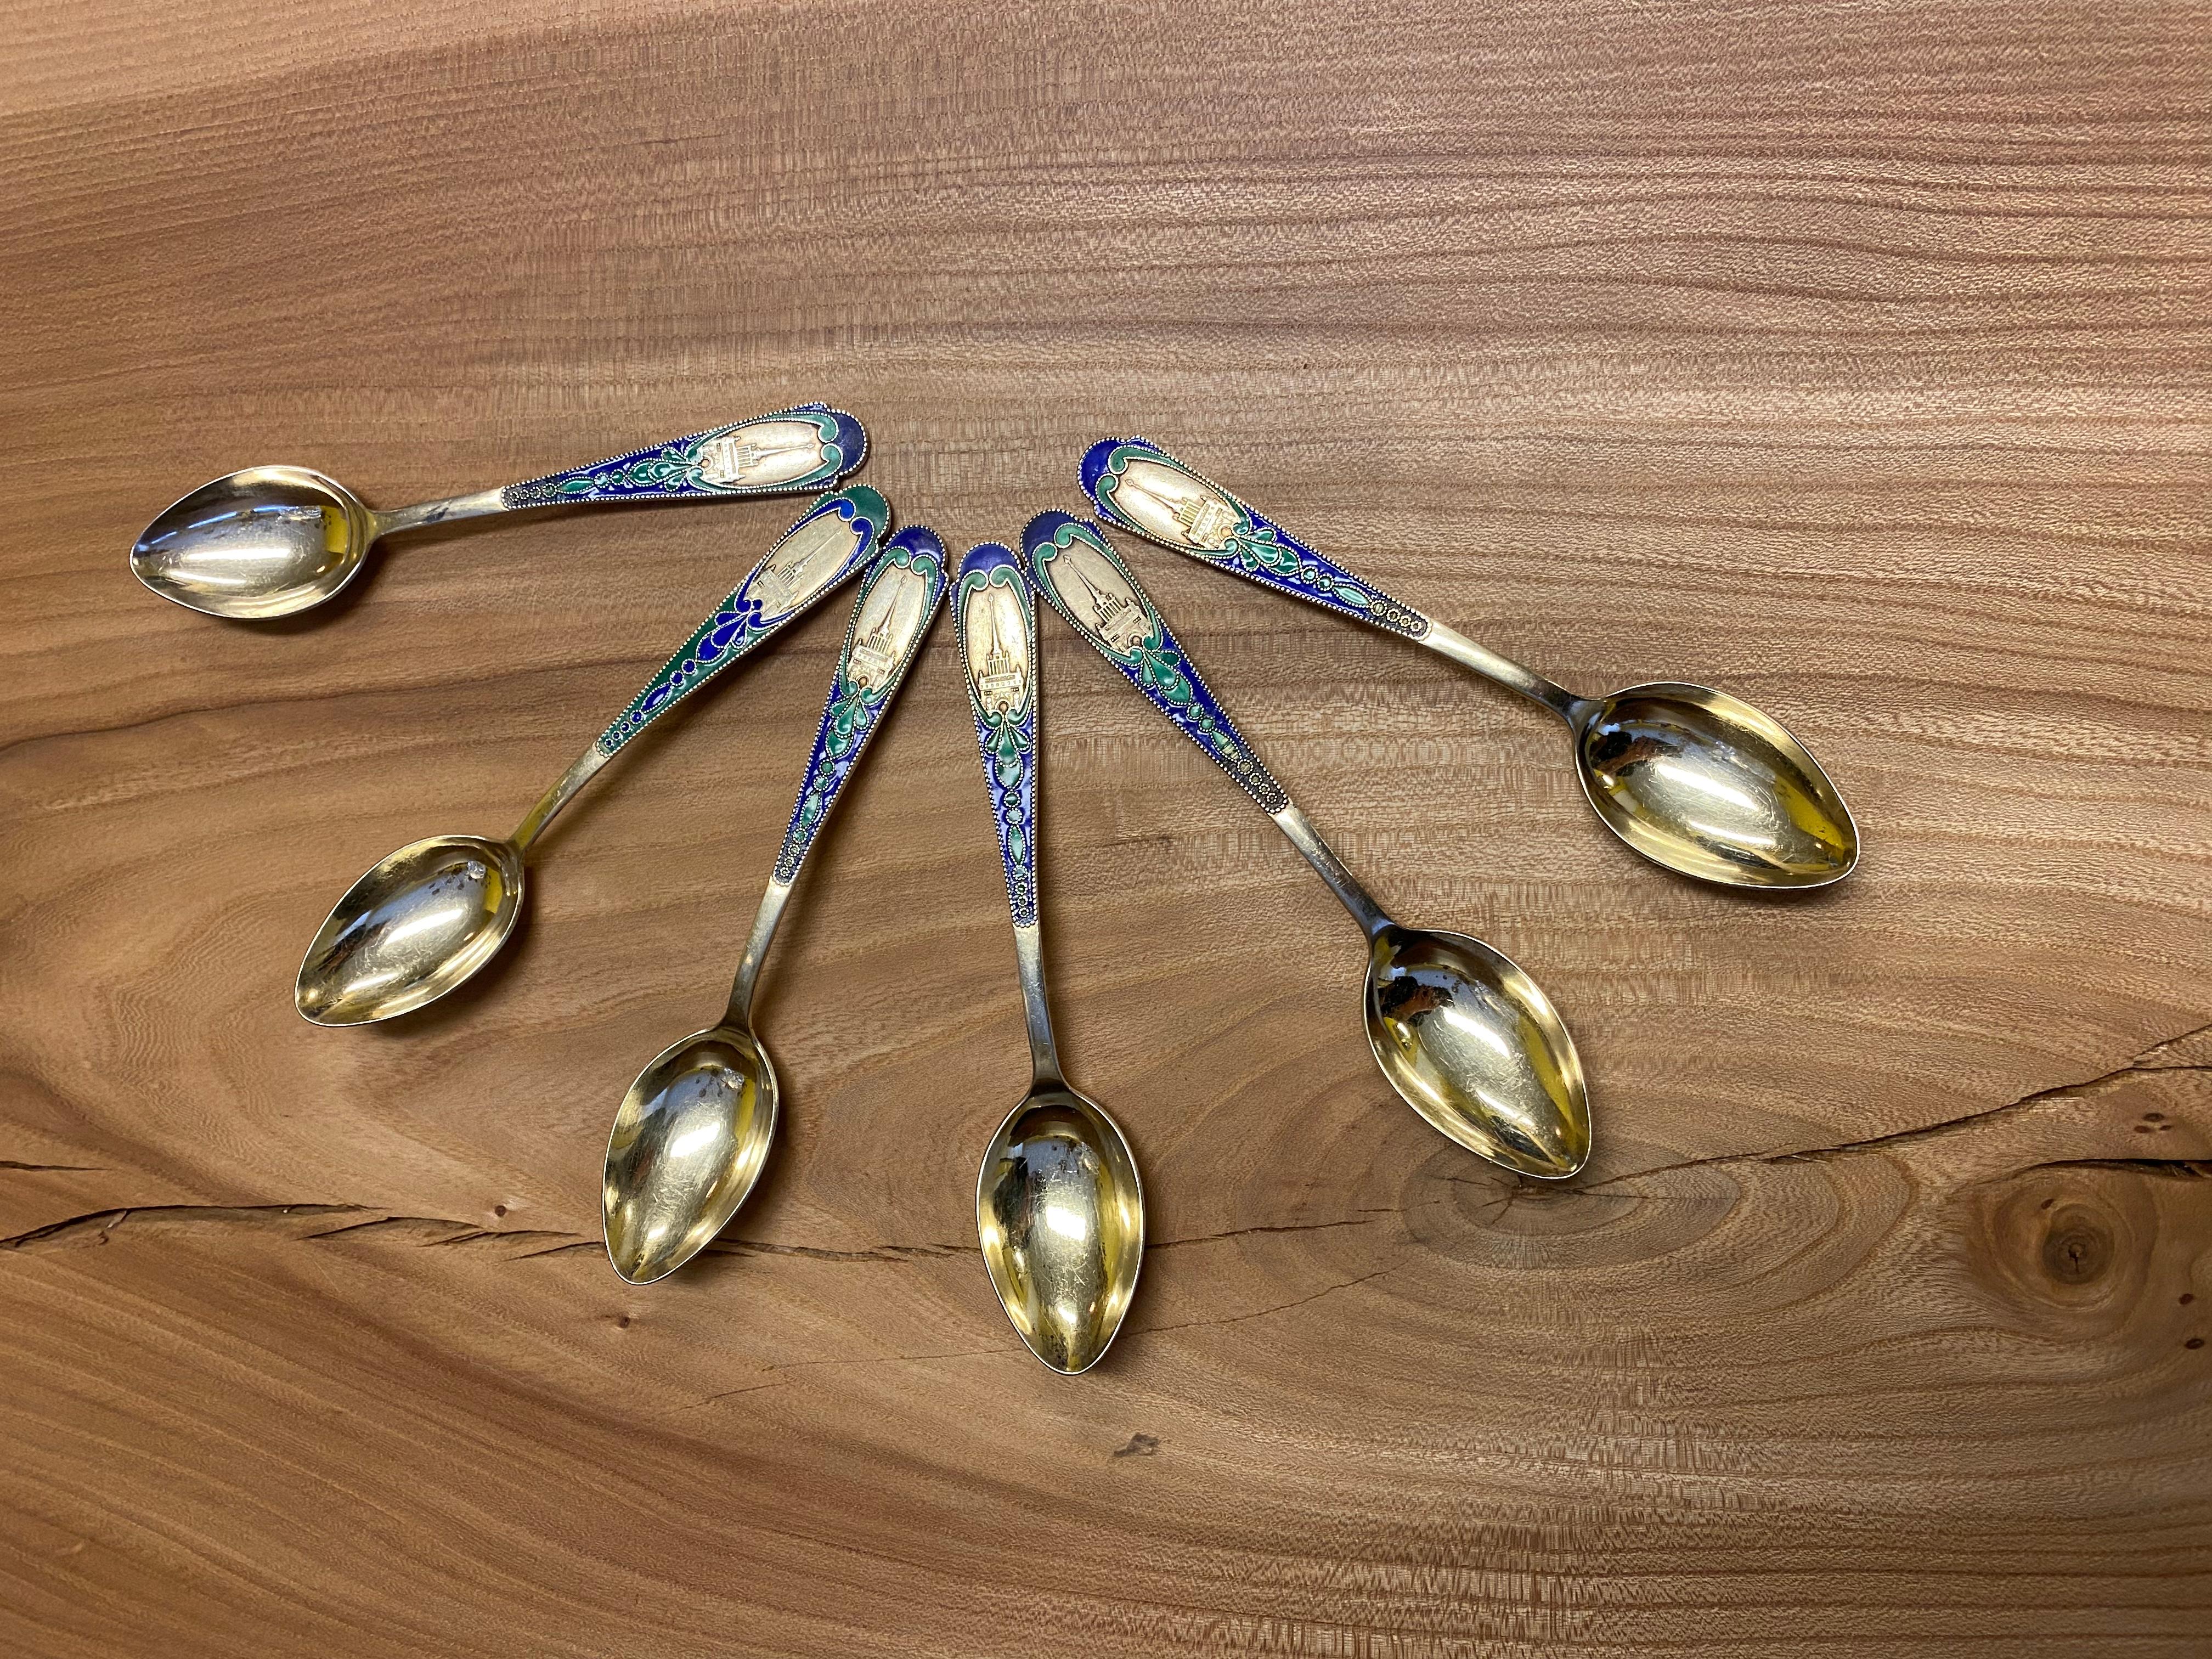 Set of 6 Russian Enamel Spoons Fine and Rare Soviet Silver Spoons For Sale 2